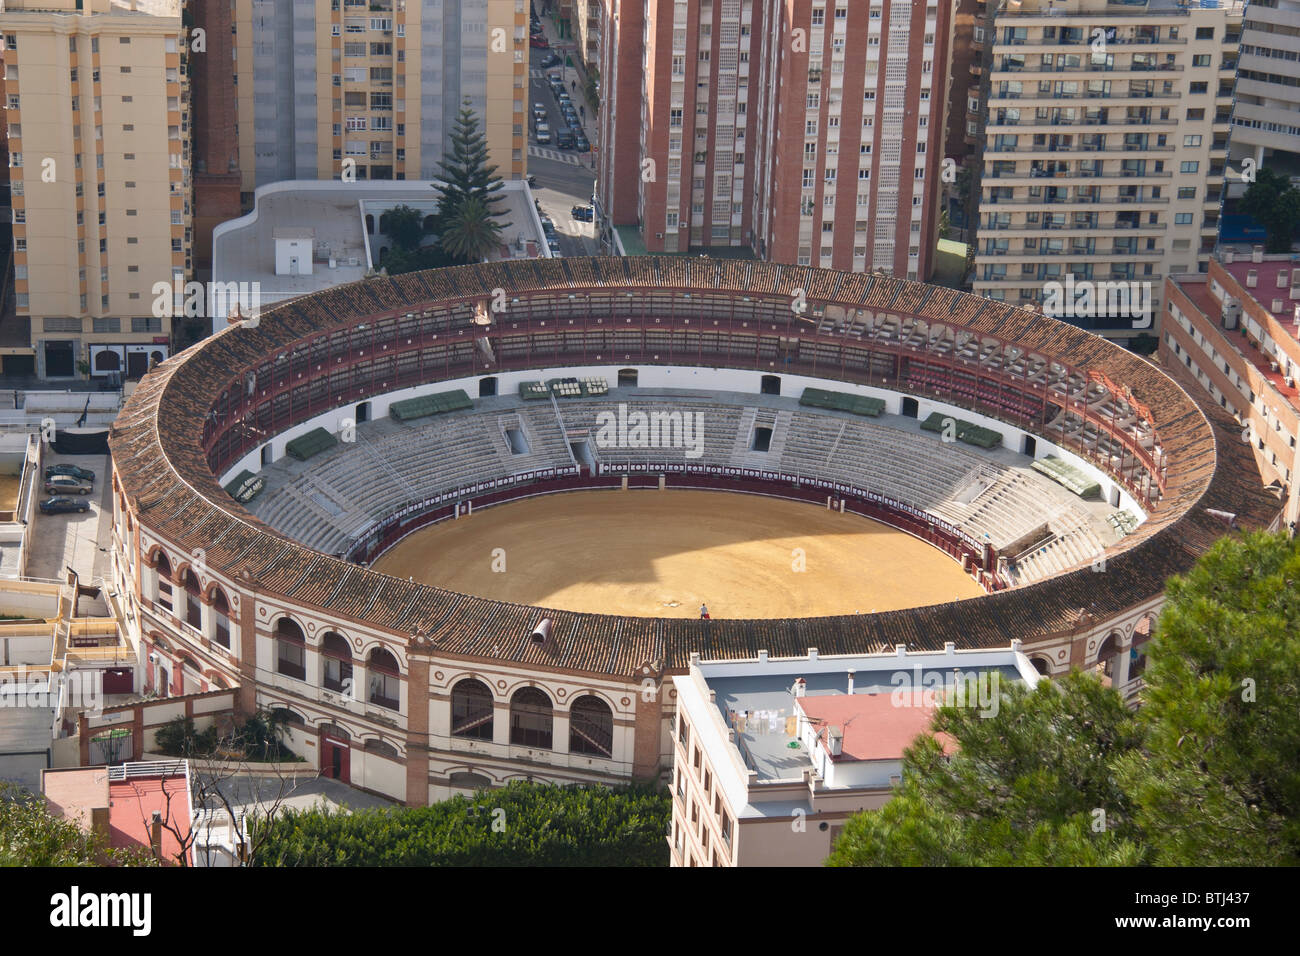 View looking down towards the Malaga Bull ring in Andalucia, Spain. Stock Photo